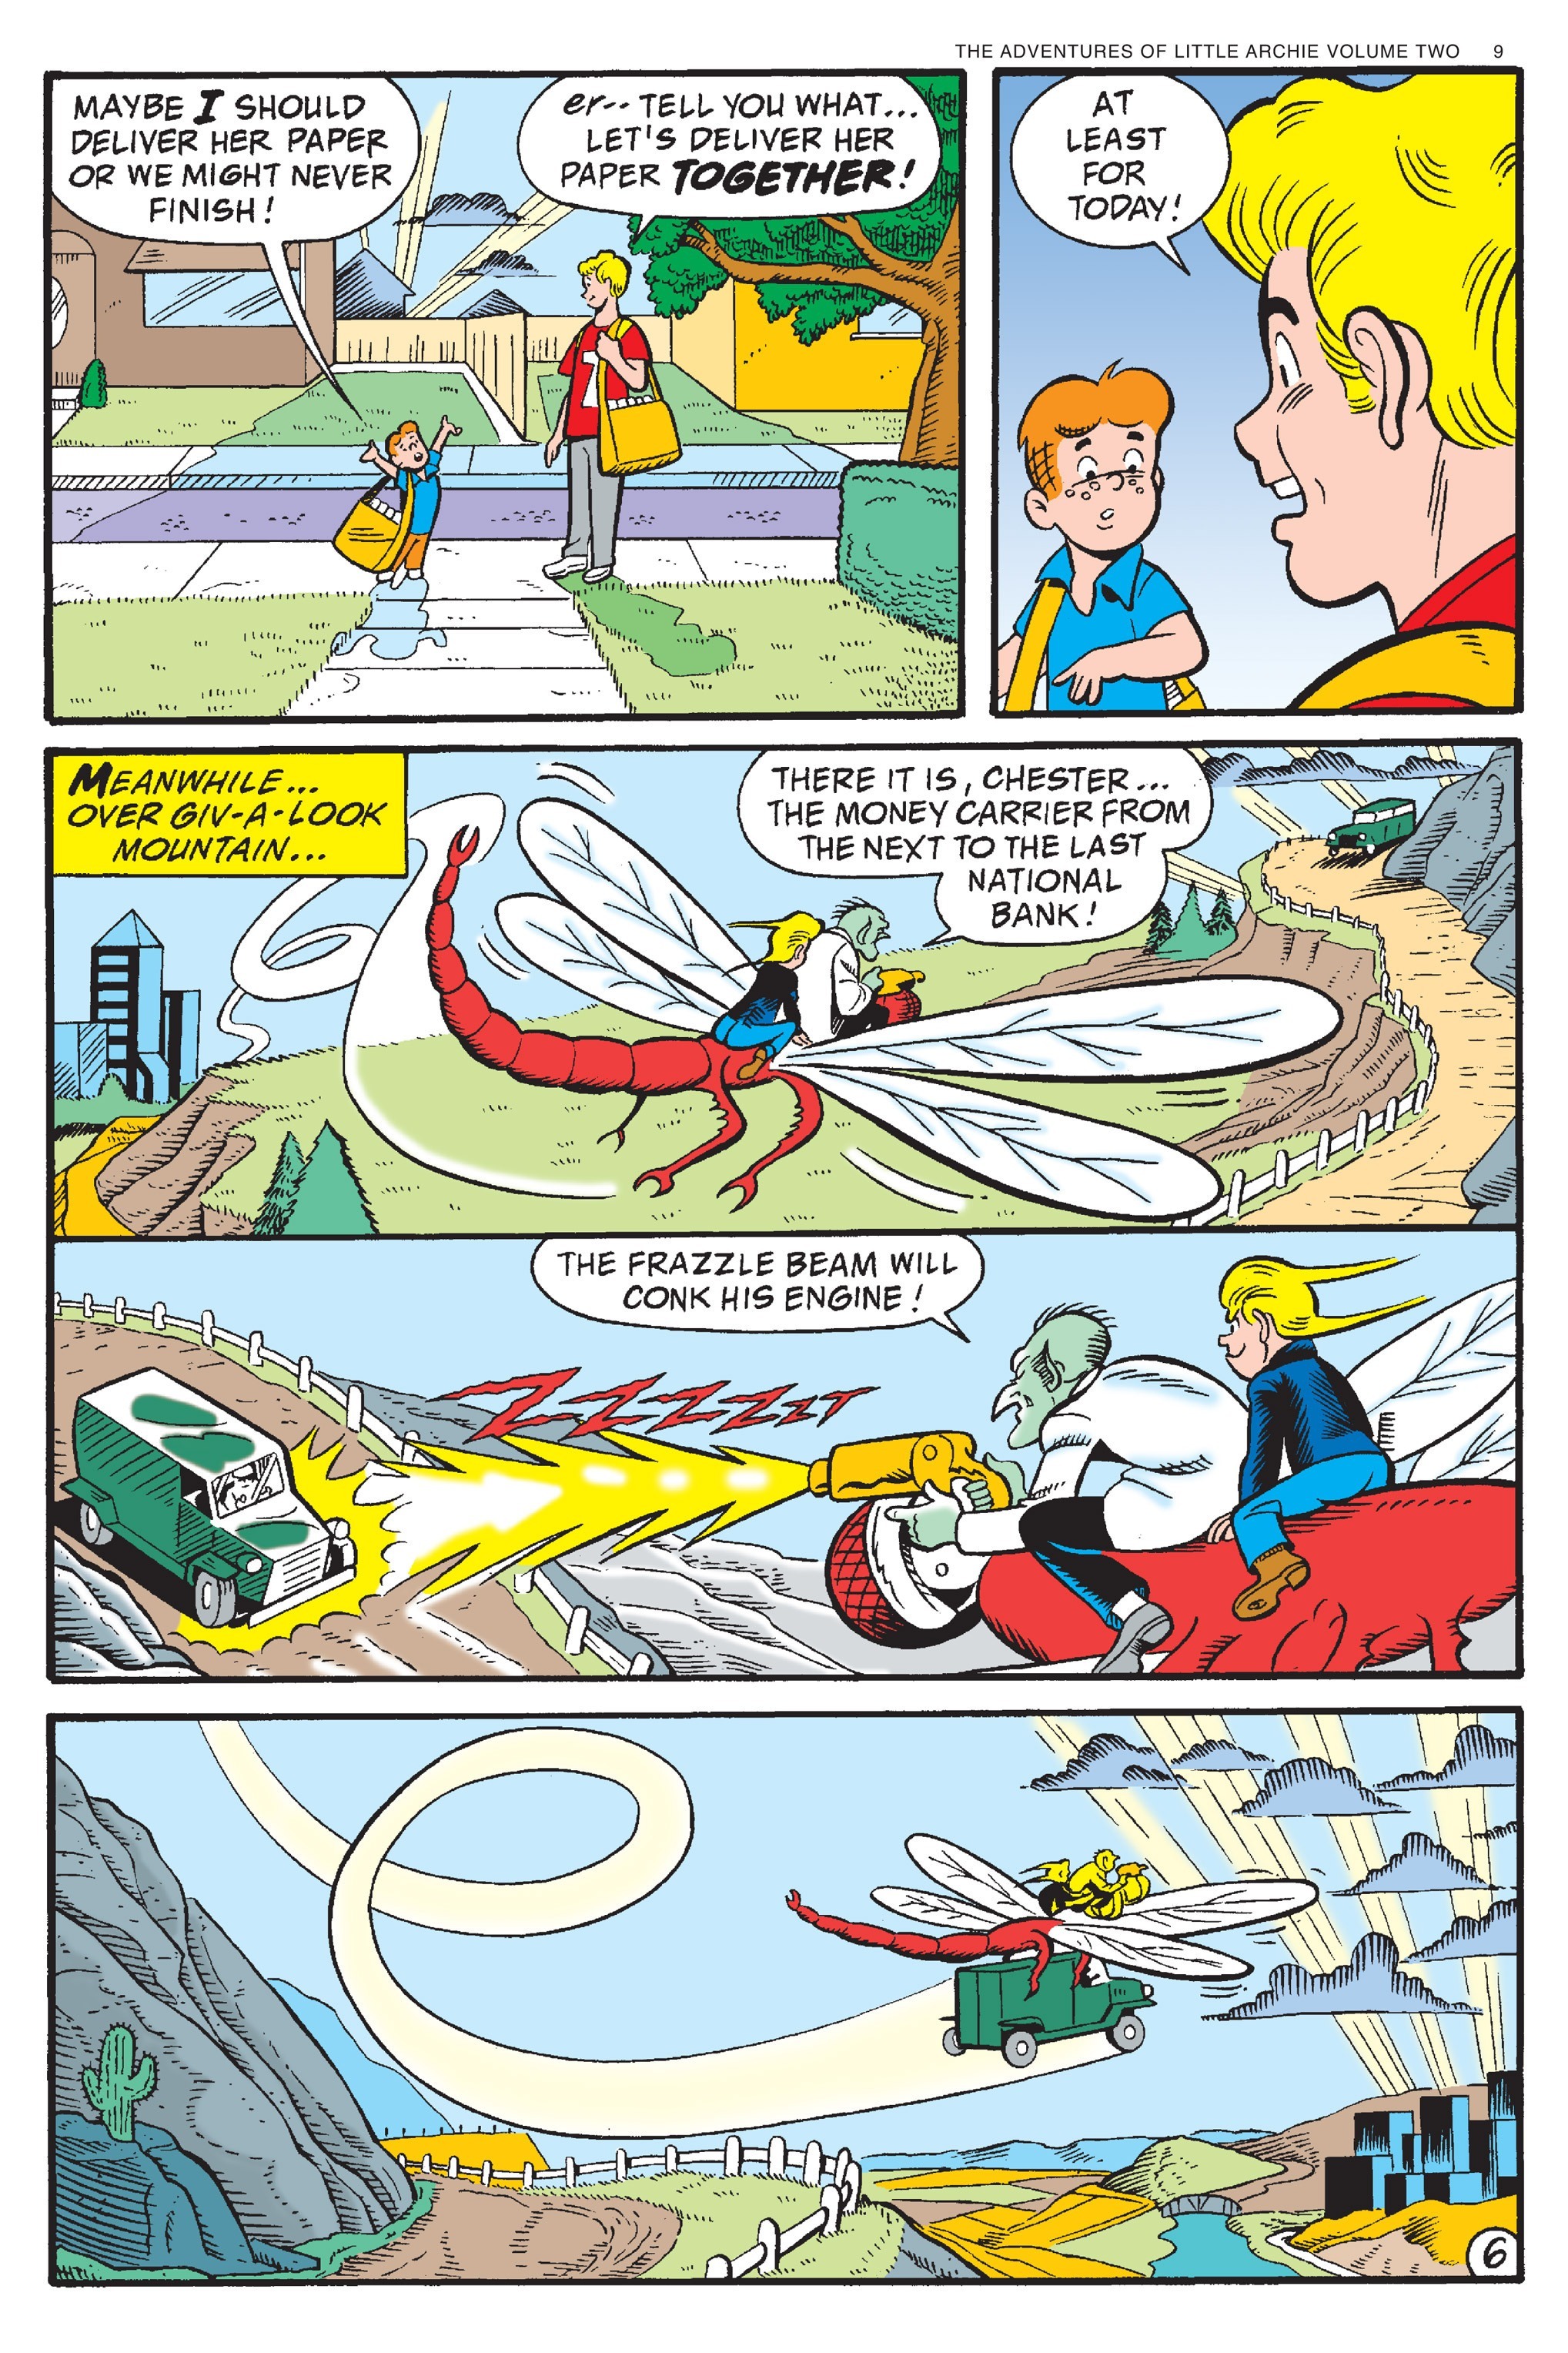 Read online Adventures of Little Archie comic -  Issue # TPB 2 - 10